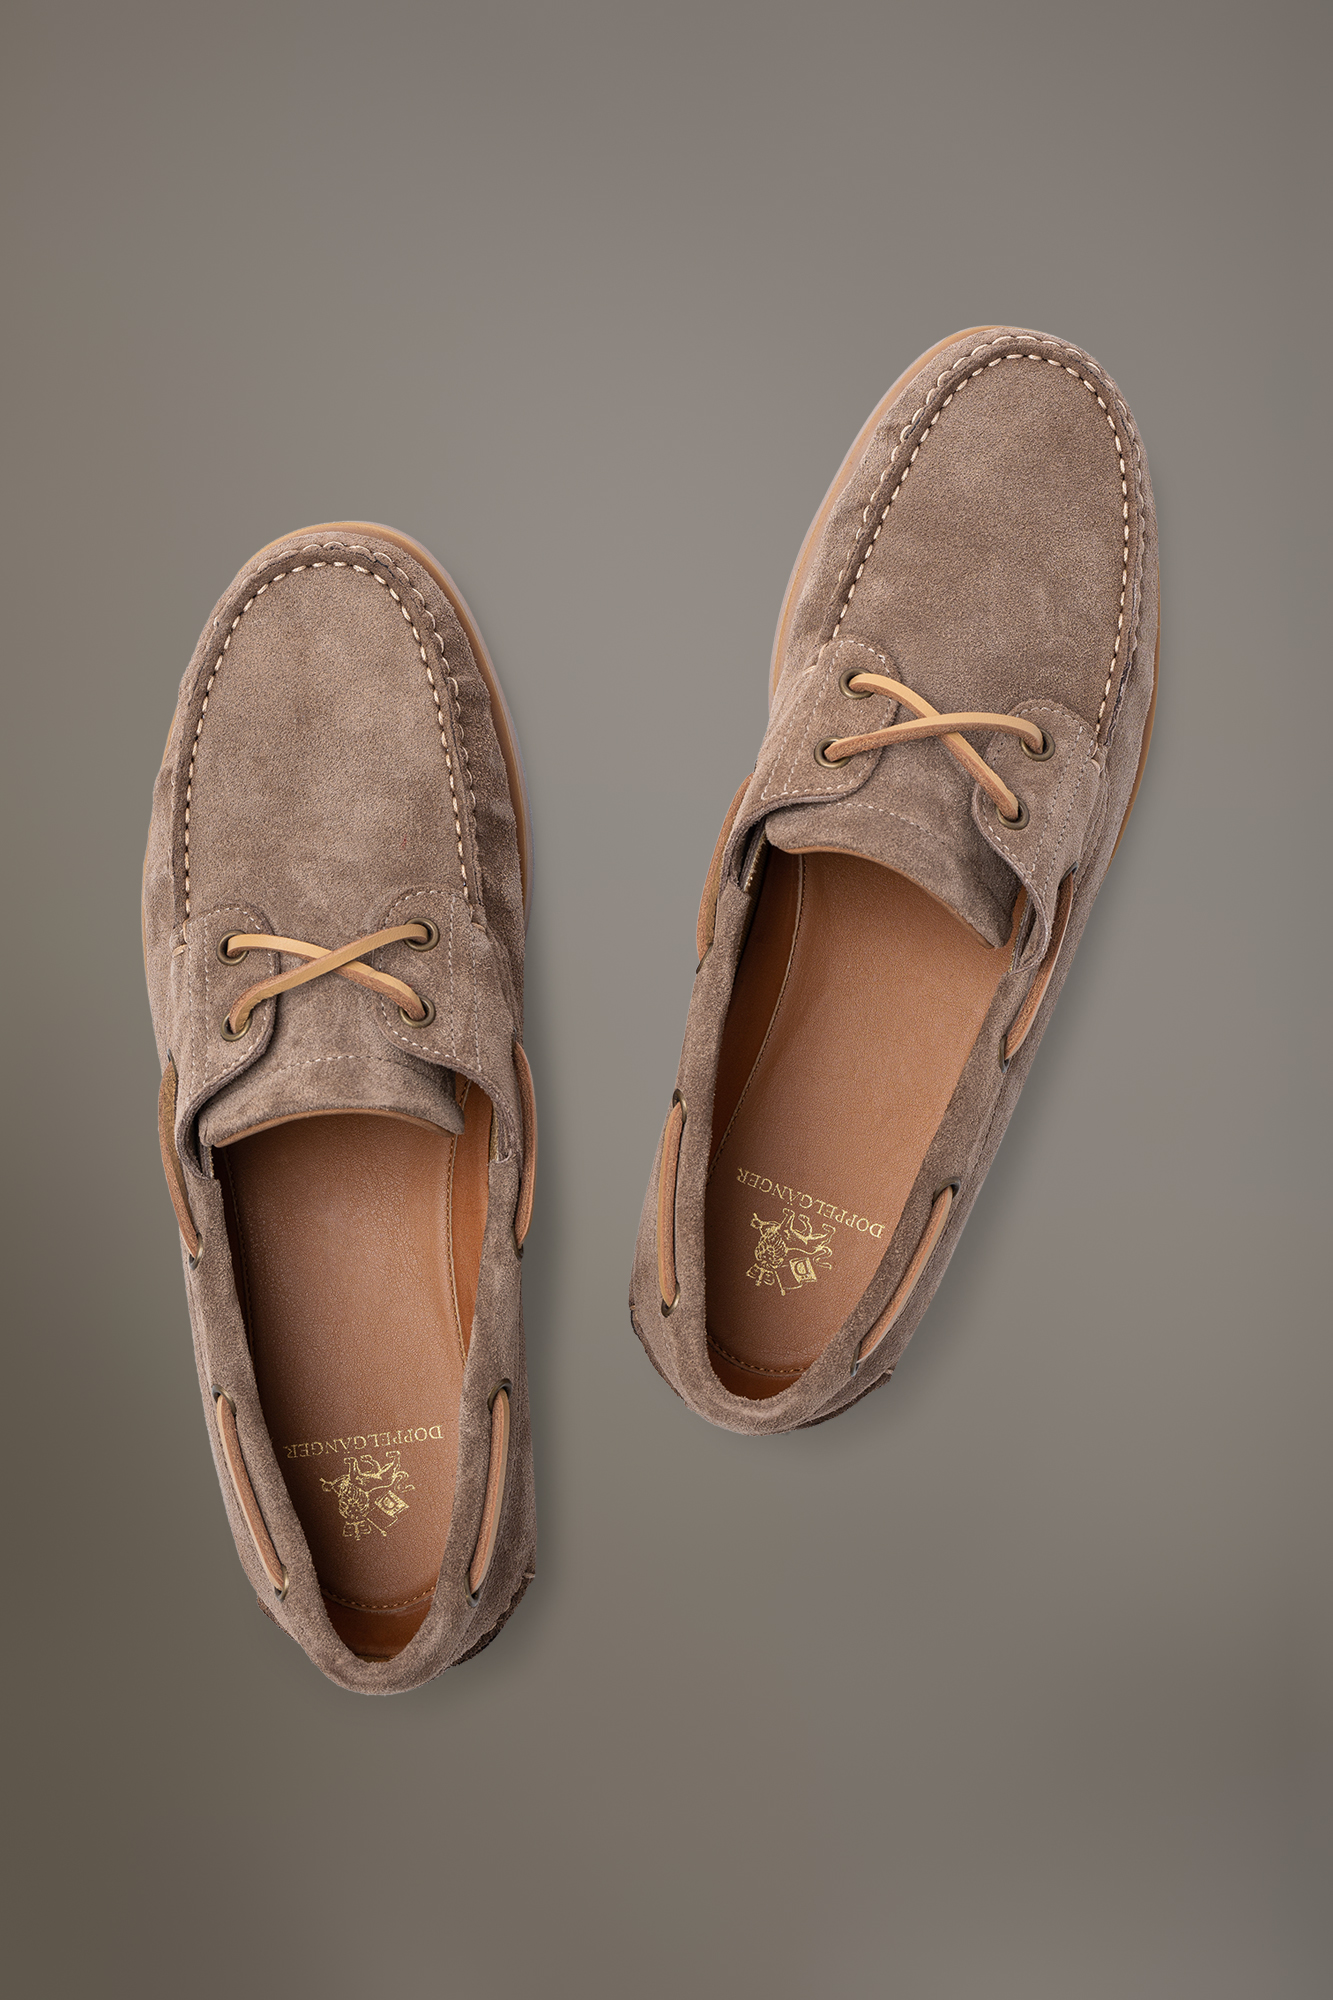 Suede boat shoes 100% leather with rubber sole image number null